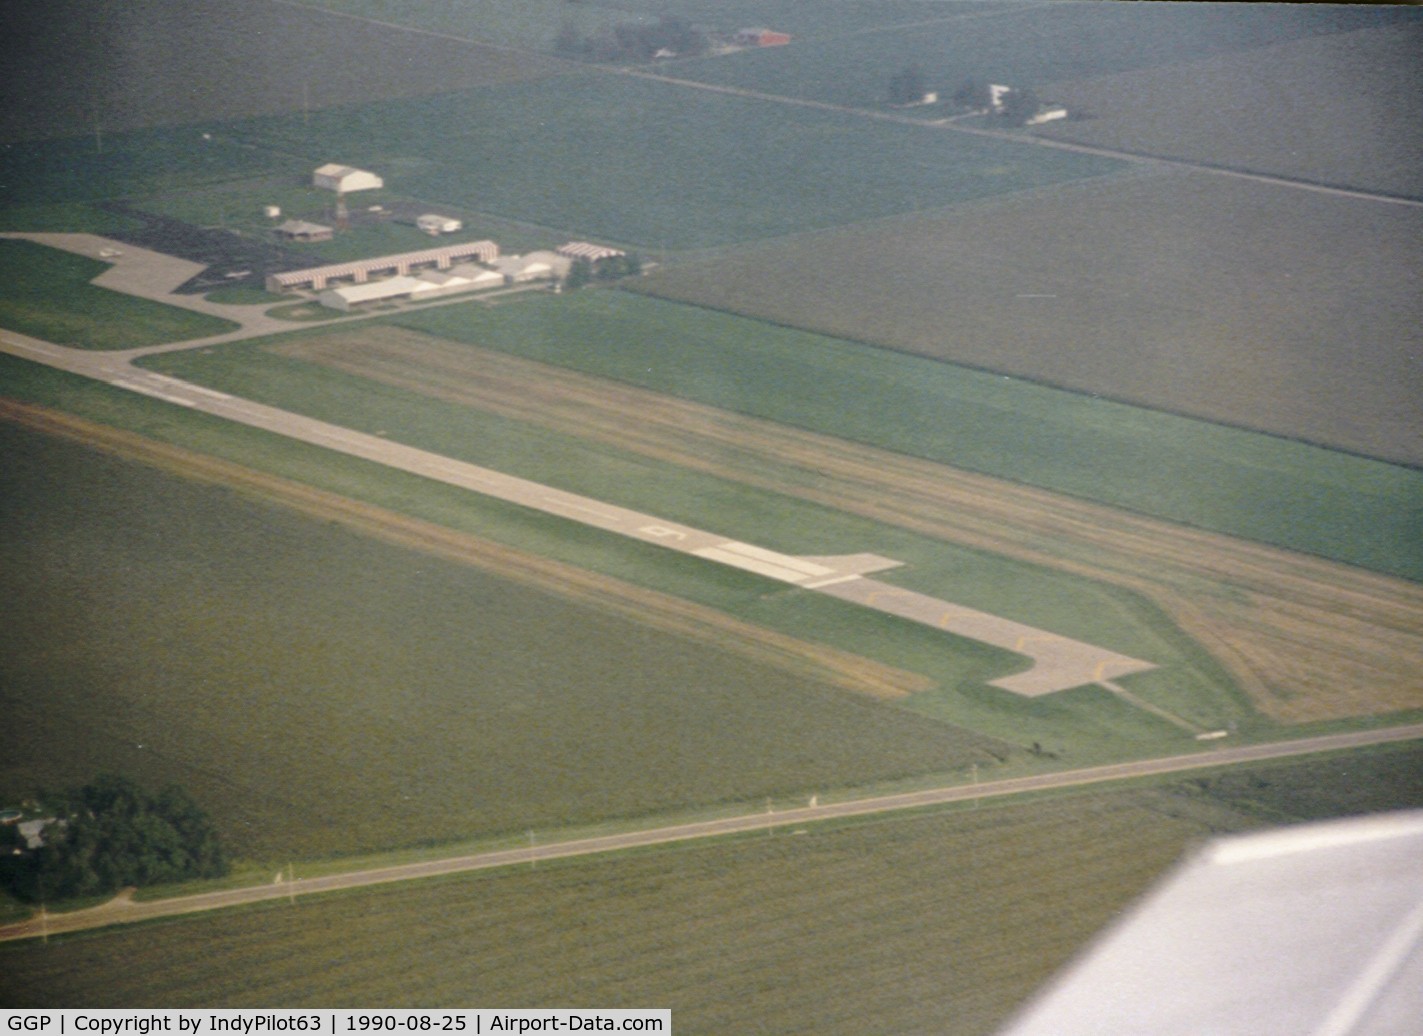 Logansport/cass County Airport (GGP) - A flight in a Piper Comanche from Speedway (now closed) to GGP